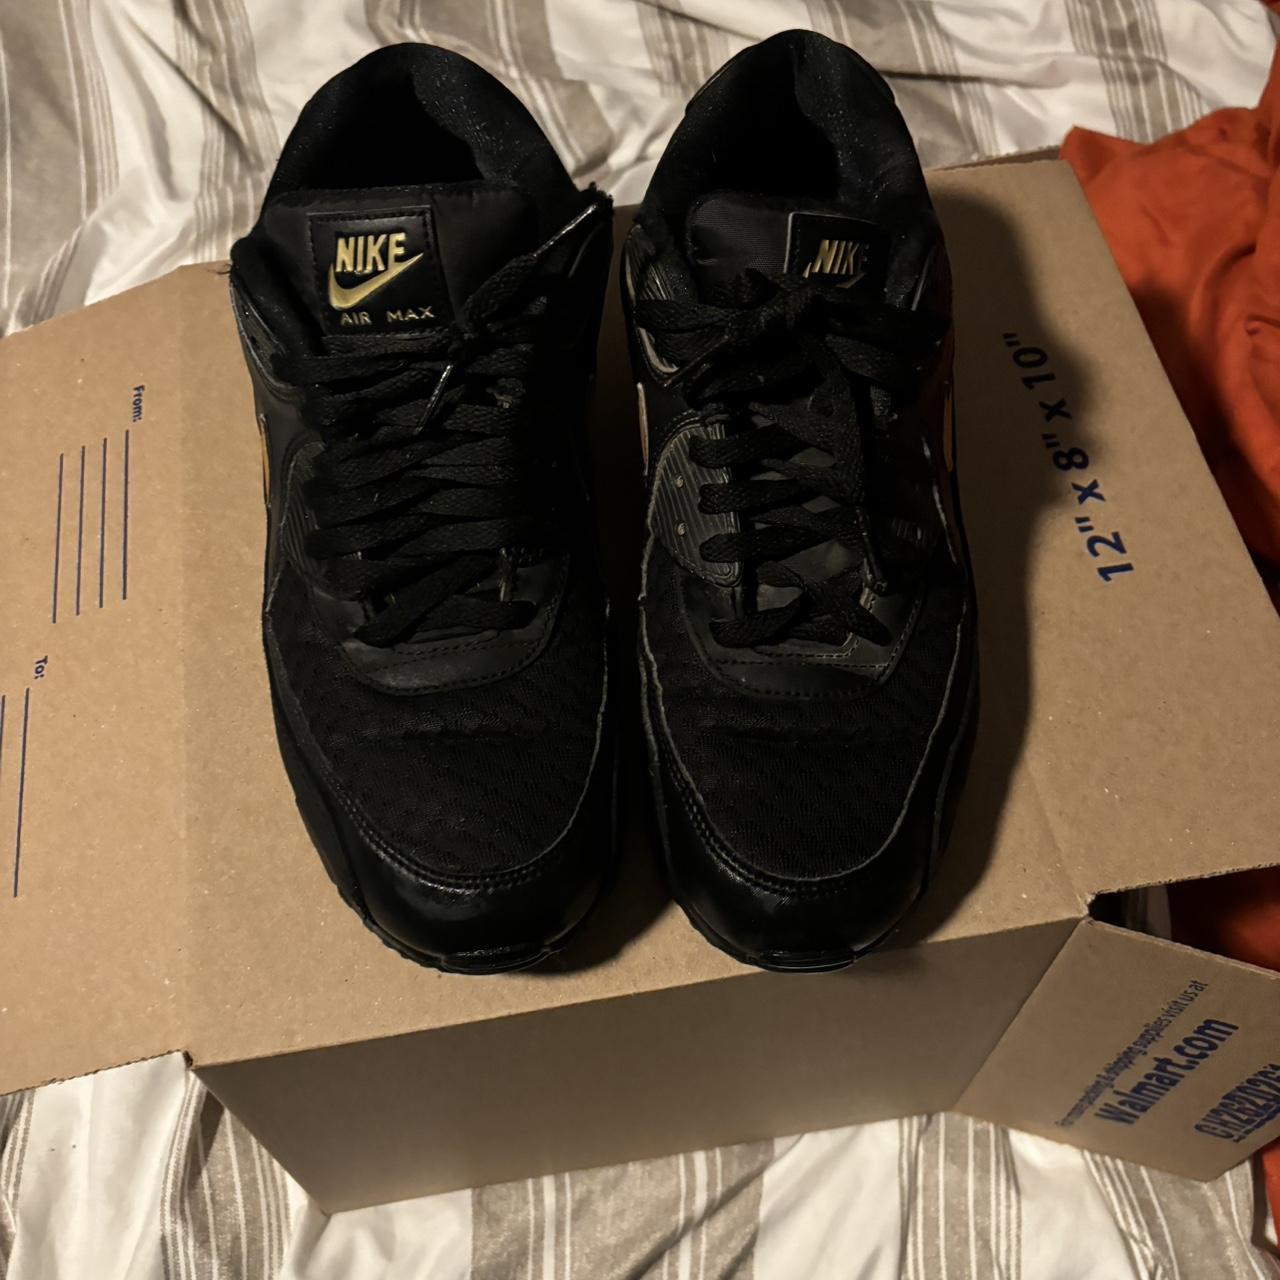 Nike air max 90s Size 9.5 Color gold with black - Depop